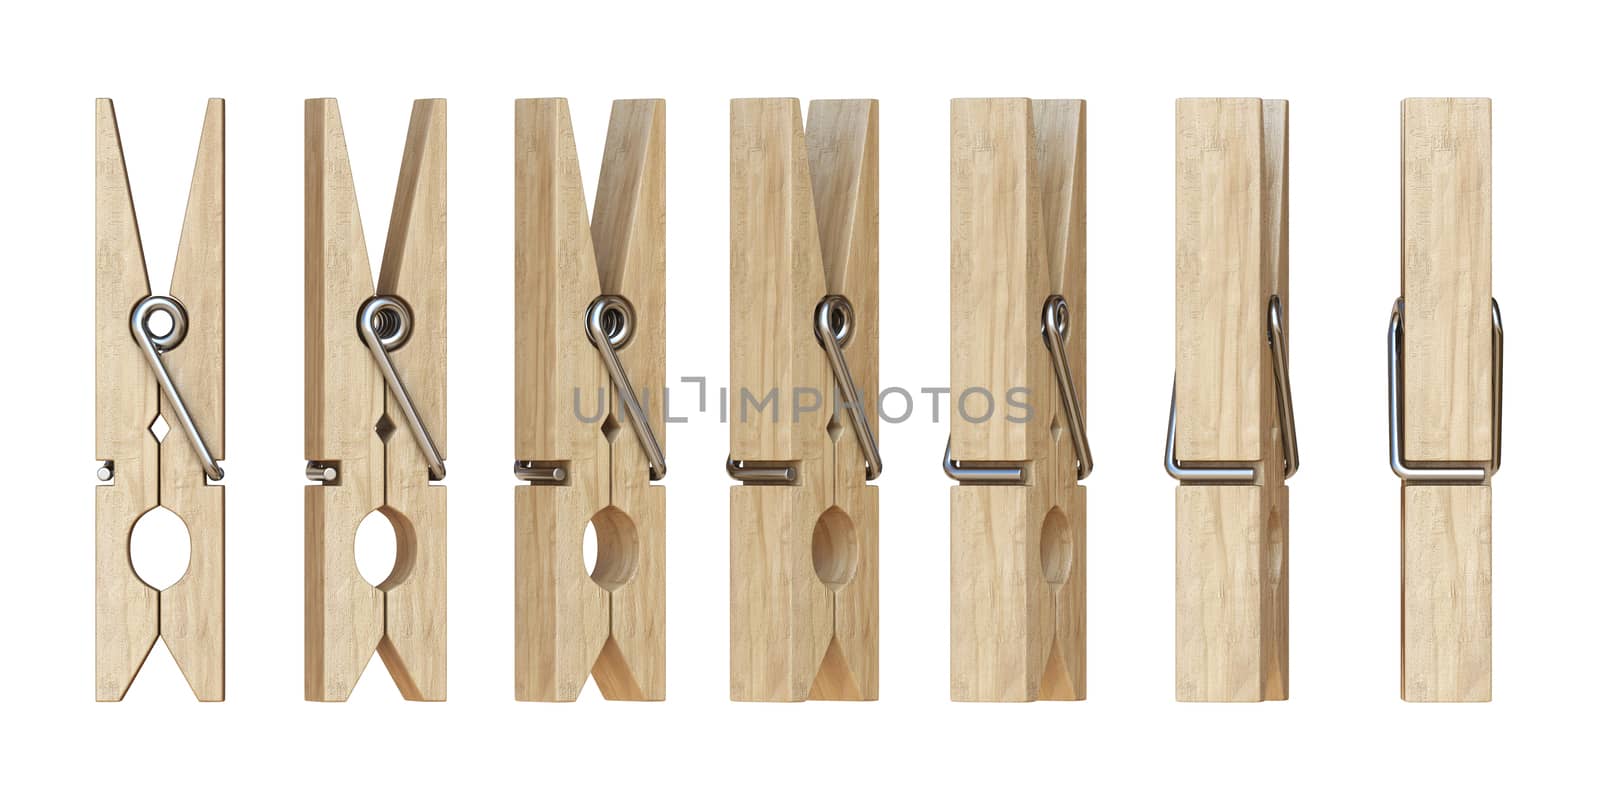 Wooden clothespins 3D rendering illustration isolated on white background